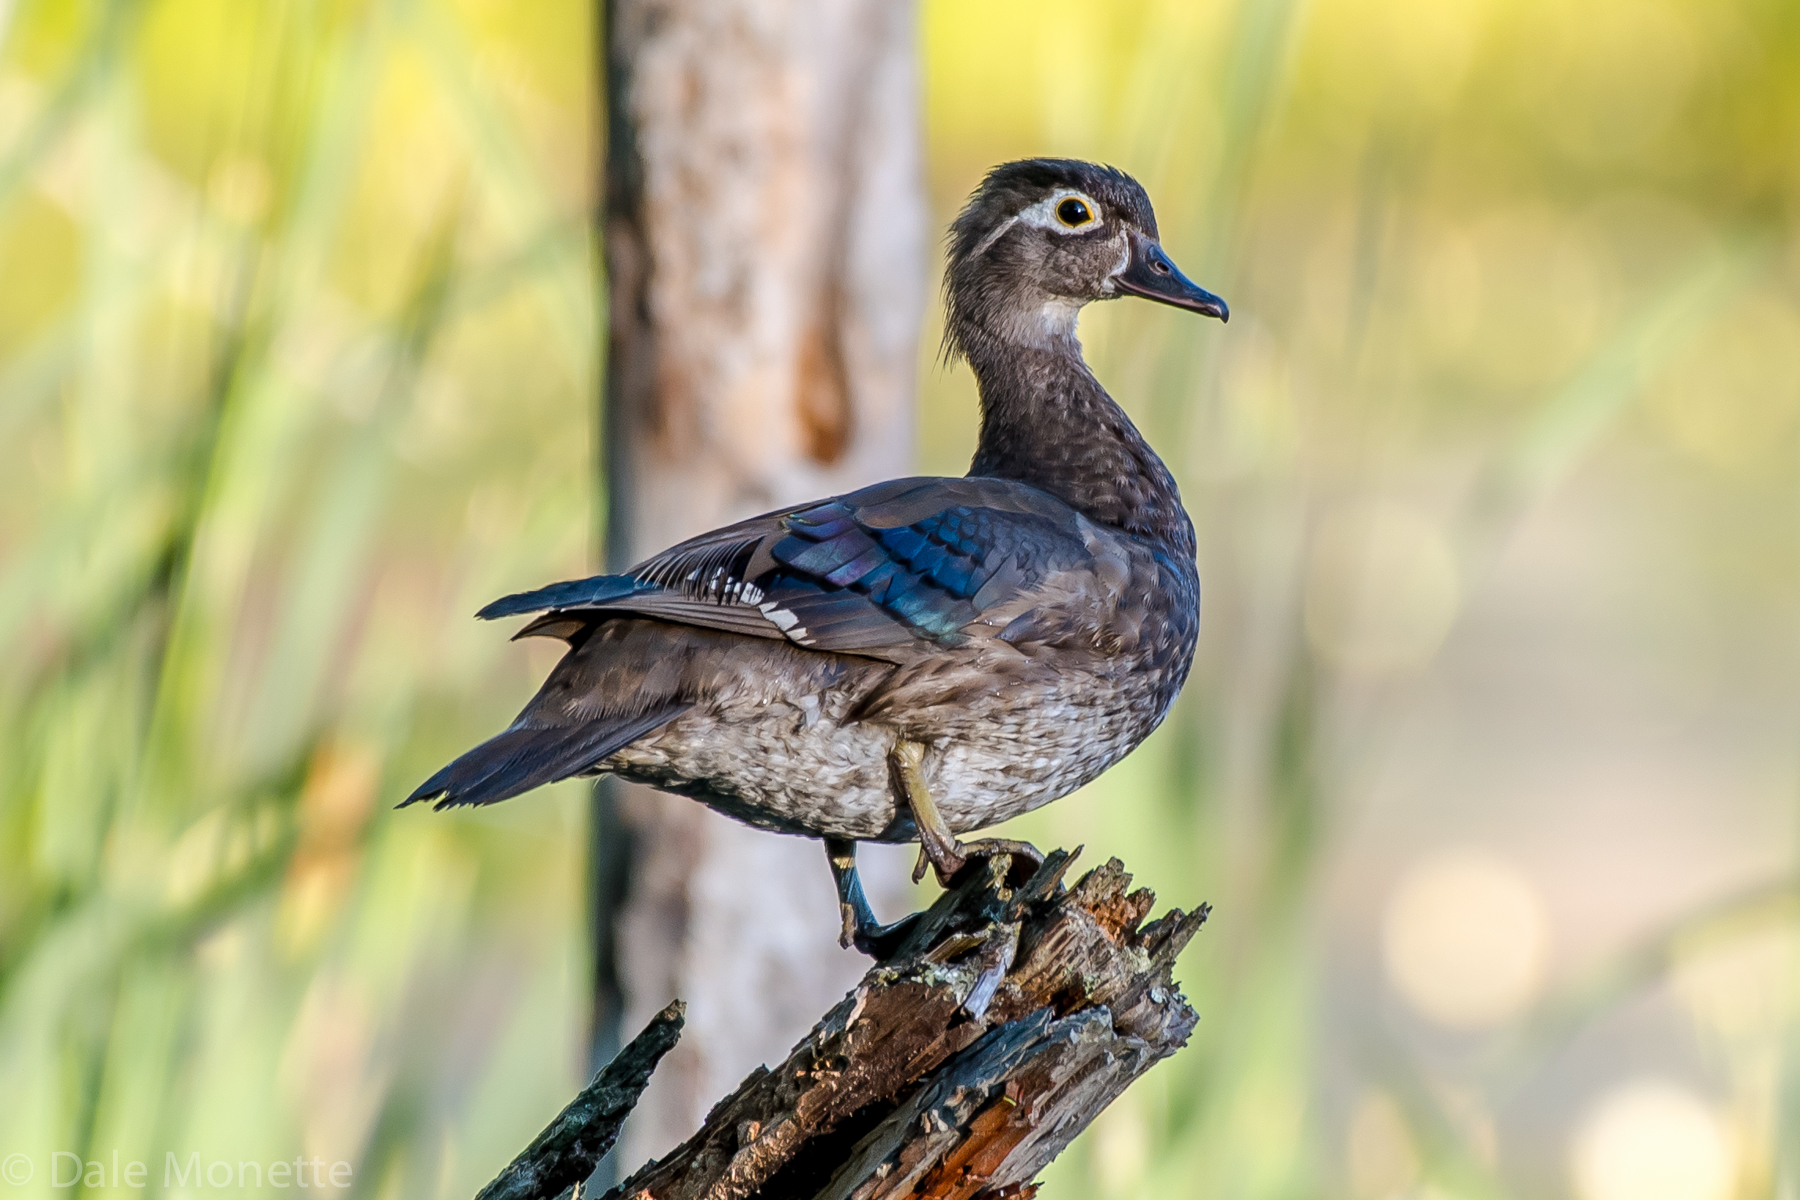   This female wood duck flew in about 50 feet to the left of me and landed and I was 10 feet away from my camera and tripod. &nbsp;I didnt think I'd be able to get to it without scaring her away but it worked out... &nbsp;7/2/16 &nbsp;  